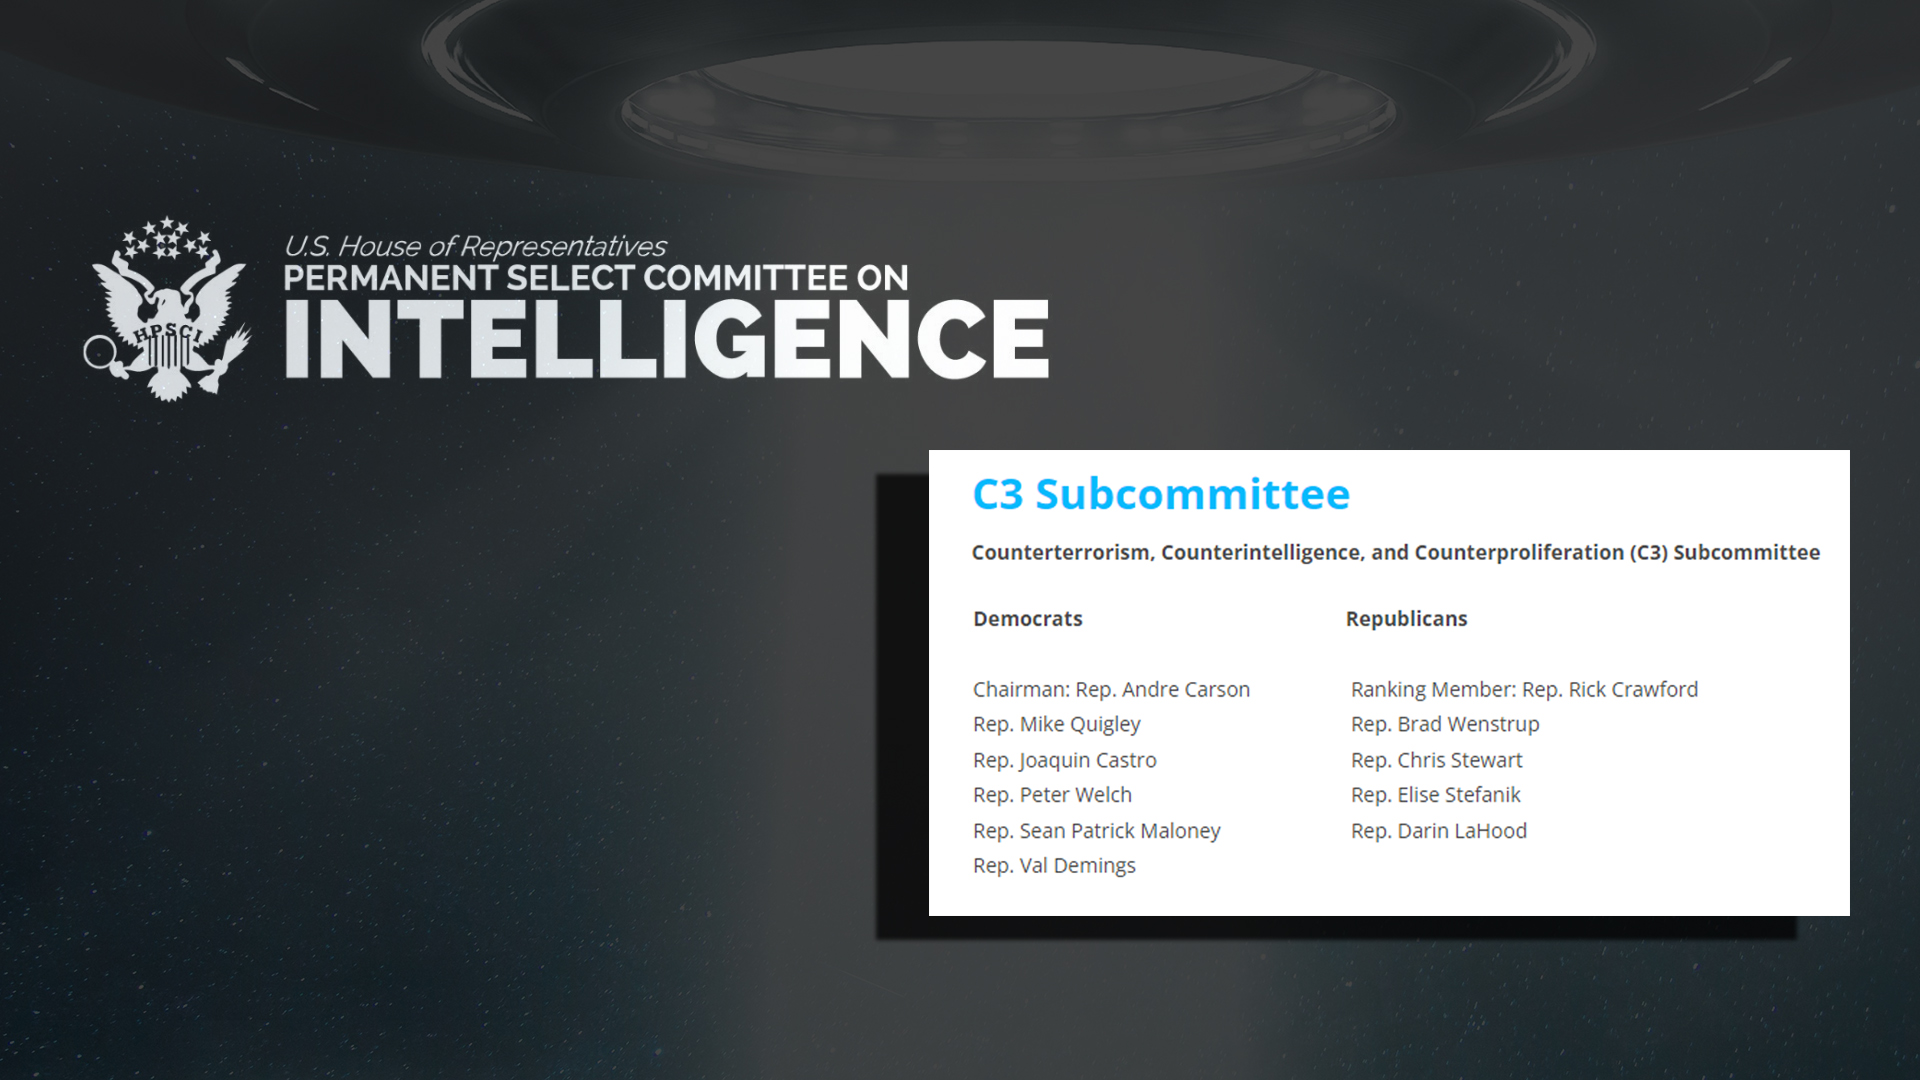 Watch LIVE the Open C3 Subcommittee Hearing on Unidentified Aerial Phenomena, May 17, 2022, at 9:00 a.m. Eastern / 6:00 a.m. Pacific